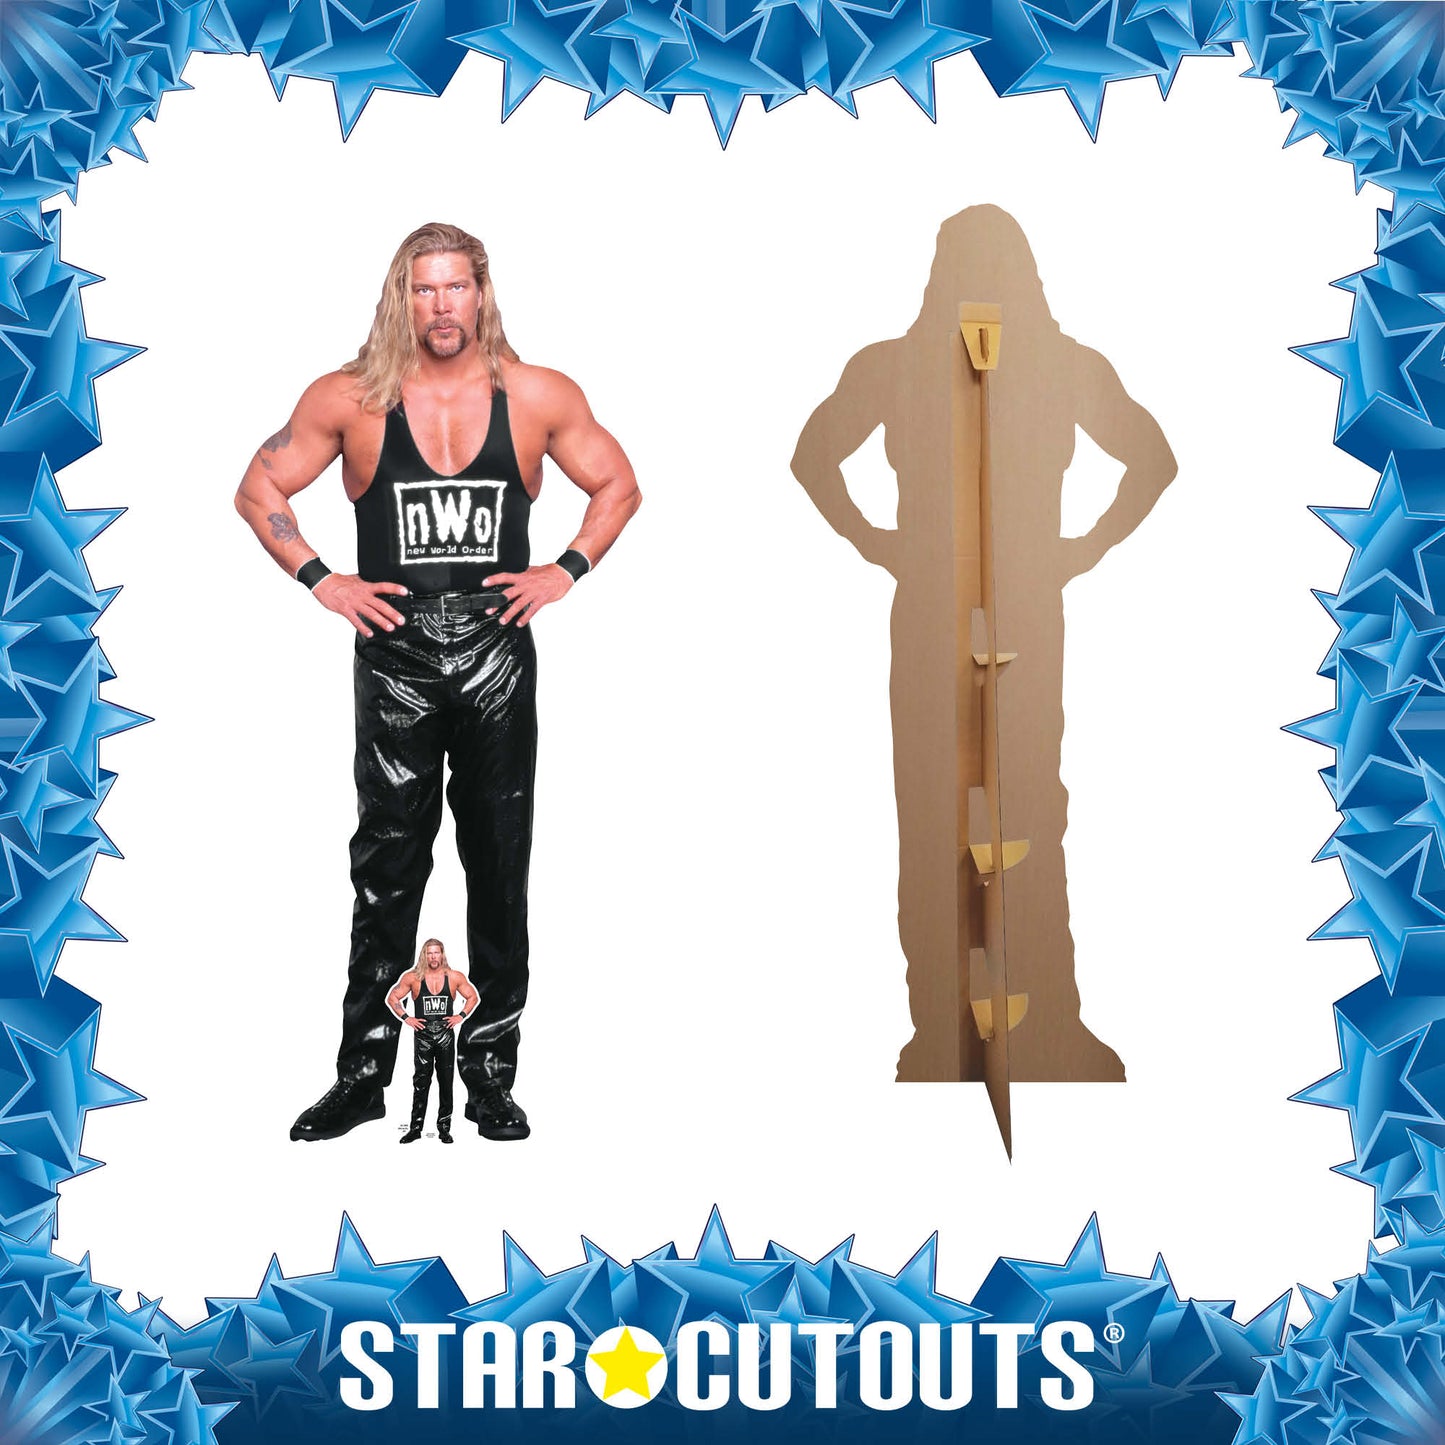 SC4413 Kevin Nash NWO WWE Cardboard Cut Out Height 196cm